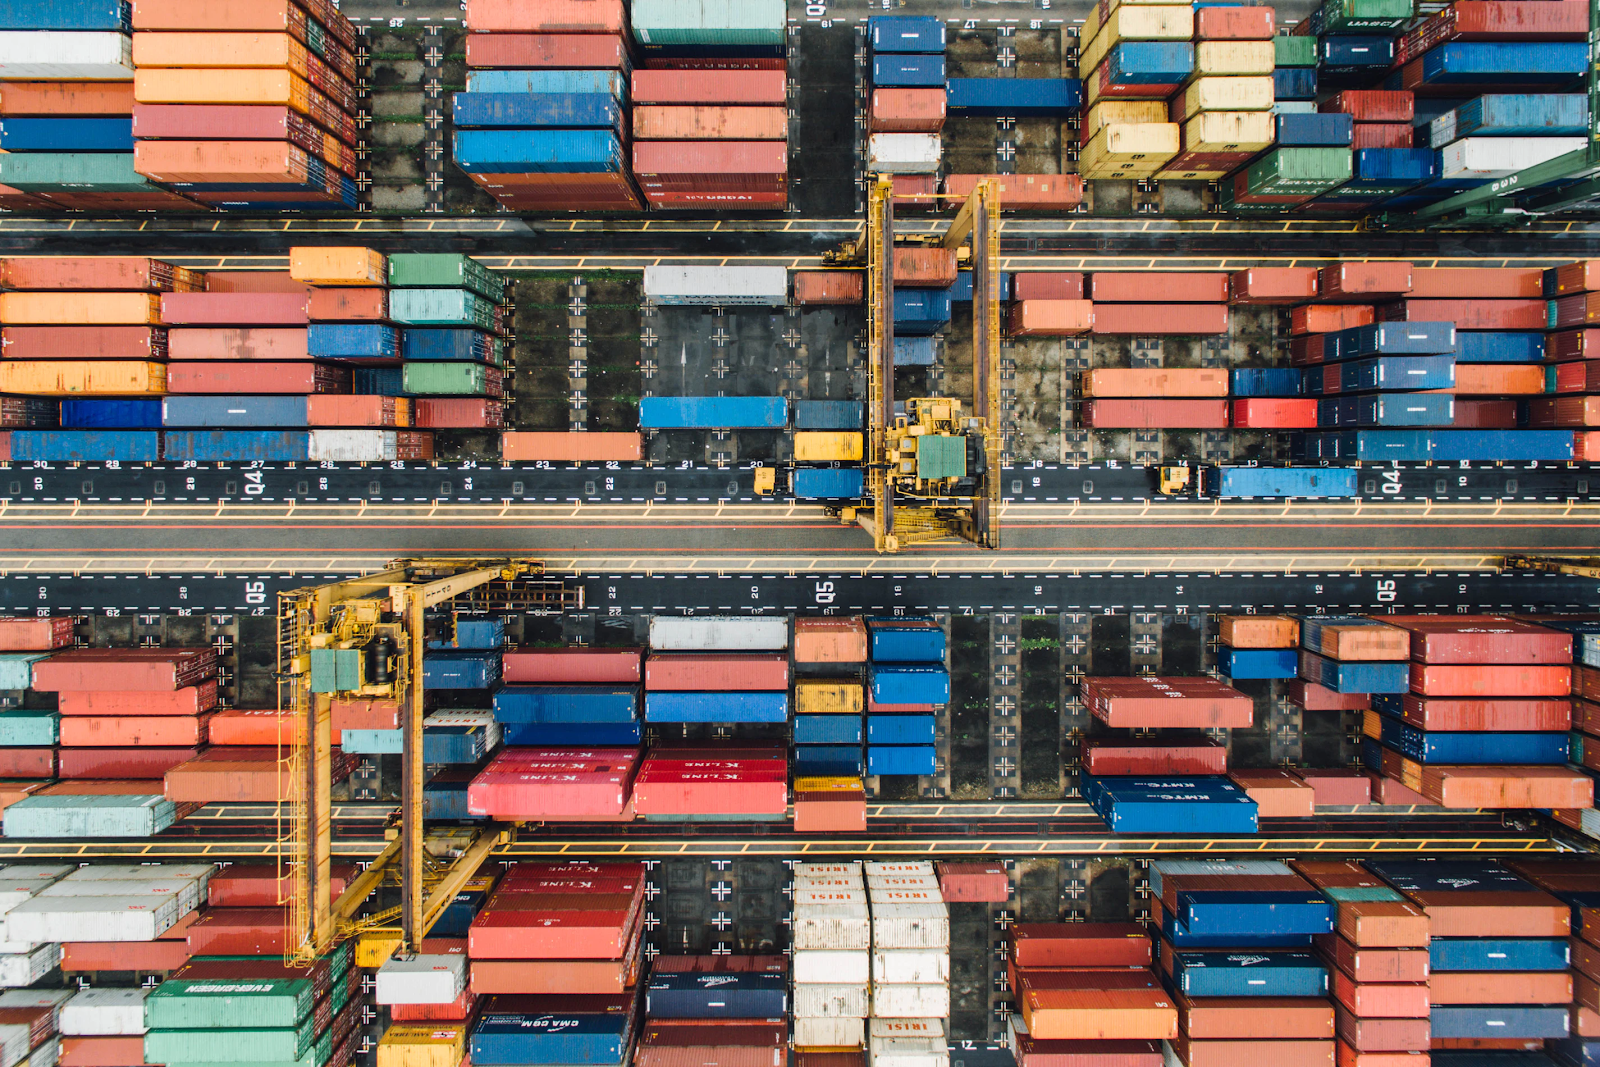 A container yard from above